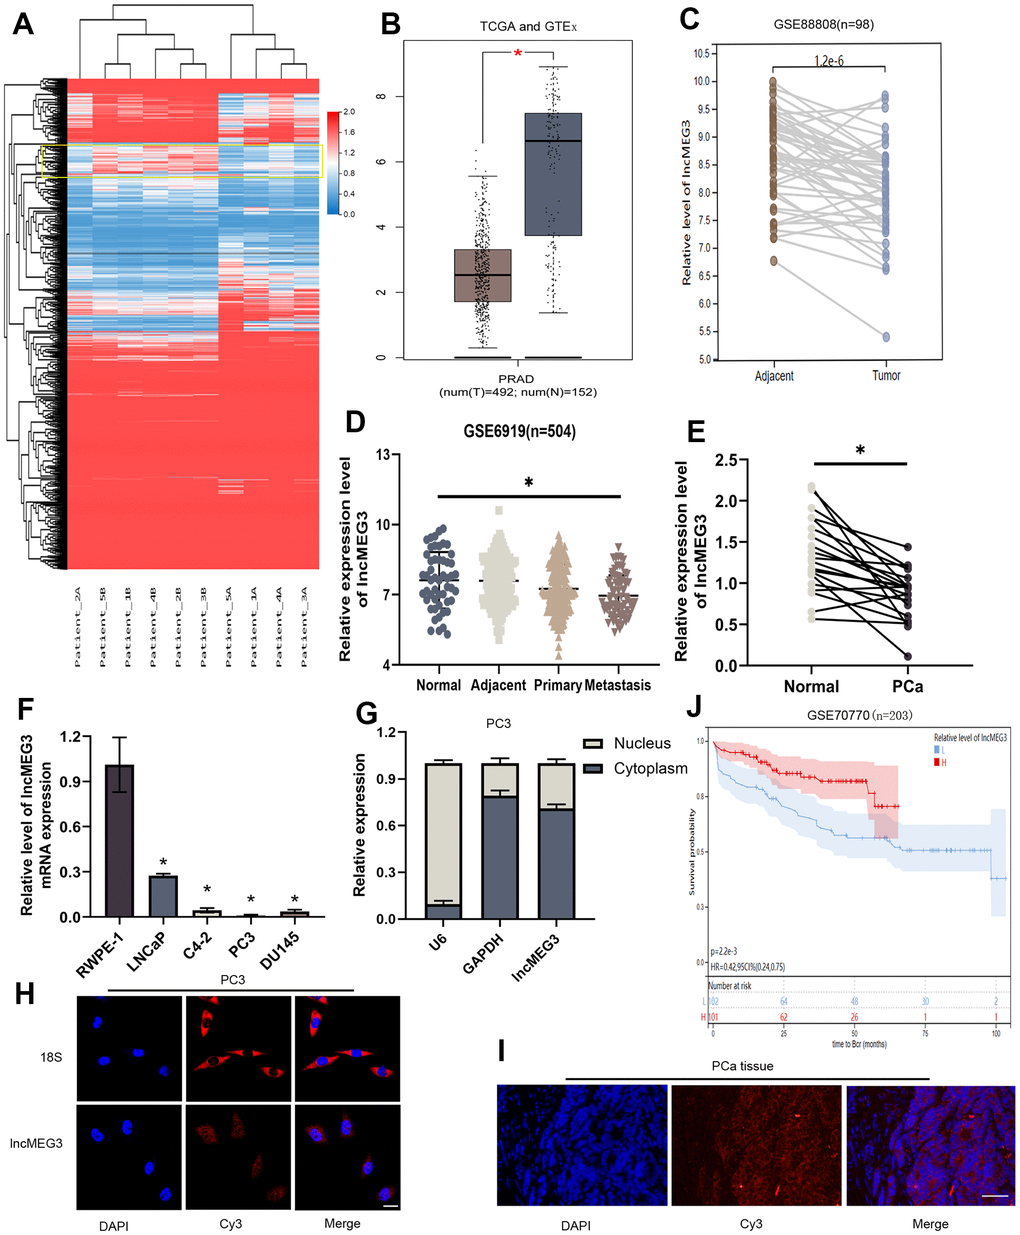 LncMEG3 was downregulated and indicated a poor clinical prognosis in PCa. (A) Differential genes between carcinoma and paracancerous tissues in patients with PCa (n=5). (B) The expression level of lncMEG3 was lower in PCa than in normal tissues in TCGA-PRAD and GTEx database. (C) LncMEG3 show a significant differences in cancerous and paracancerous tissues (GSE88808). (D) The expression level of lncMEG3 exhibit a declining tendency with the progression of PCa (GSE6919). (E) The expression levels of lncMEG3 in 20 PCa tissues and paired normal tissues. (F) The expression levels of lncMEG3 in four PCa cell lines (LNCaP, C4-2, PC3 and DU145) and normal cell line (RWPE-1). (G) Localisation of lncMEG3 was assessed by PCR in PC3 cell line. U6 and GAPDH were used as positive controls for nuclear RNA and cytoplasmic RNA, respectively. (H, I) The distribution of lncMEG3 was also analysed by FISH in PC3 cells (Scale bar, 20μm) and PCa tissues (Scale bar, 50μm). 18S showed in the cytoplasm. (J) The patients with lower level of lncMEG3 were more likely to have biochemical recurrence according to the dates from GSE70770, * P 